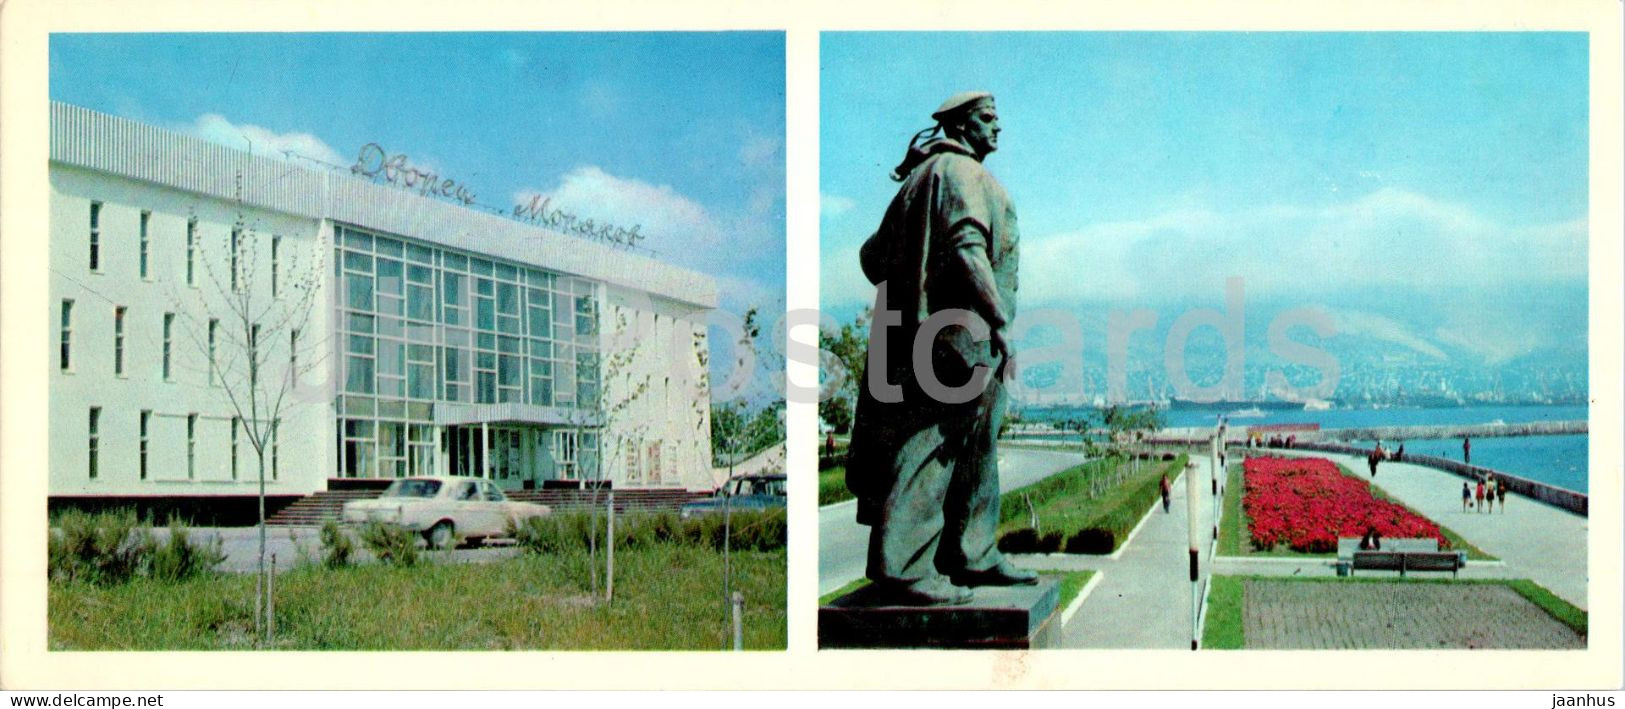 Novorossiysk - Sailors Palace Of Culture - Monument To Unknown Sailor - 1977 - Russia USSR - Unused - Rusland